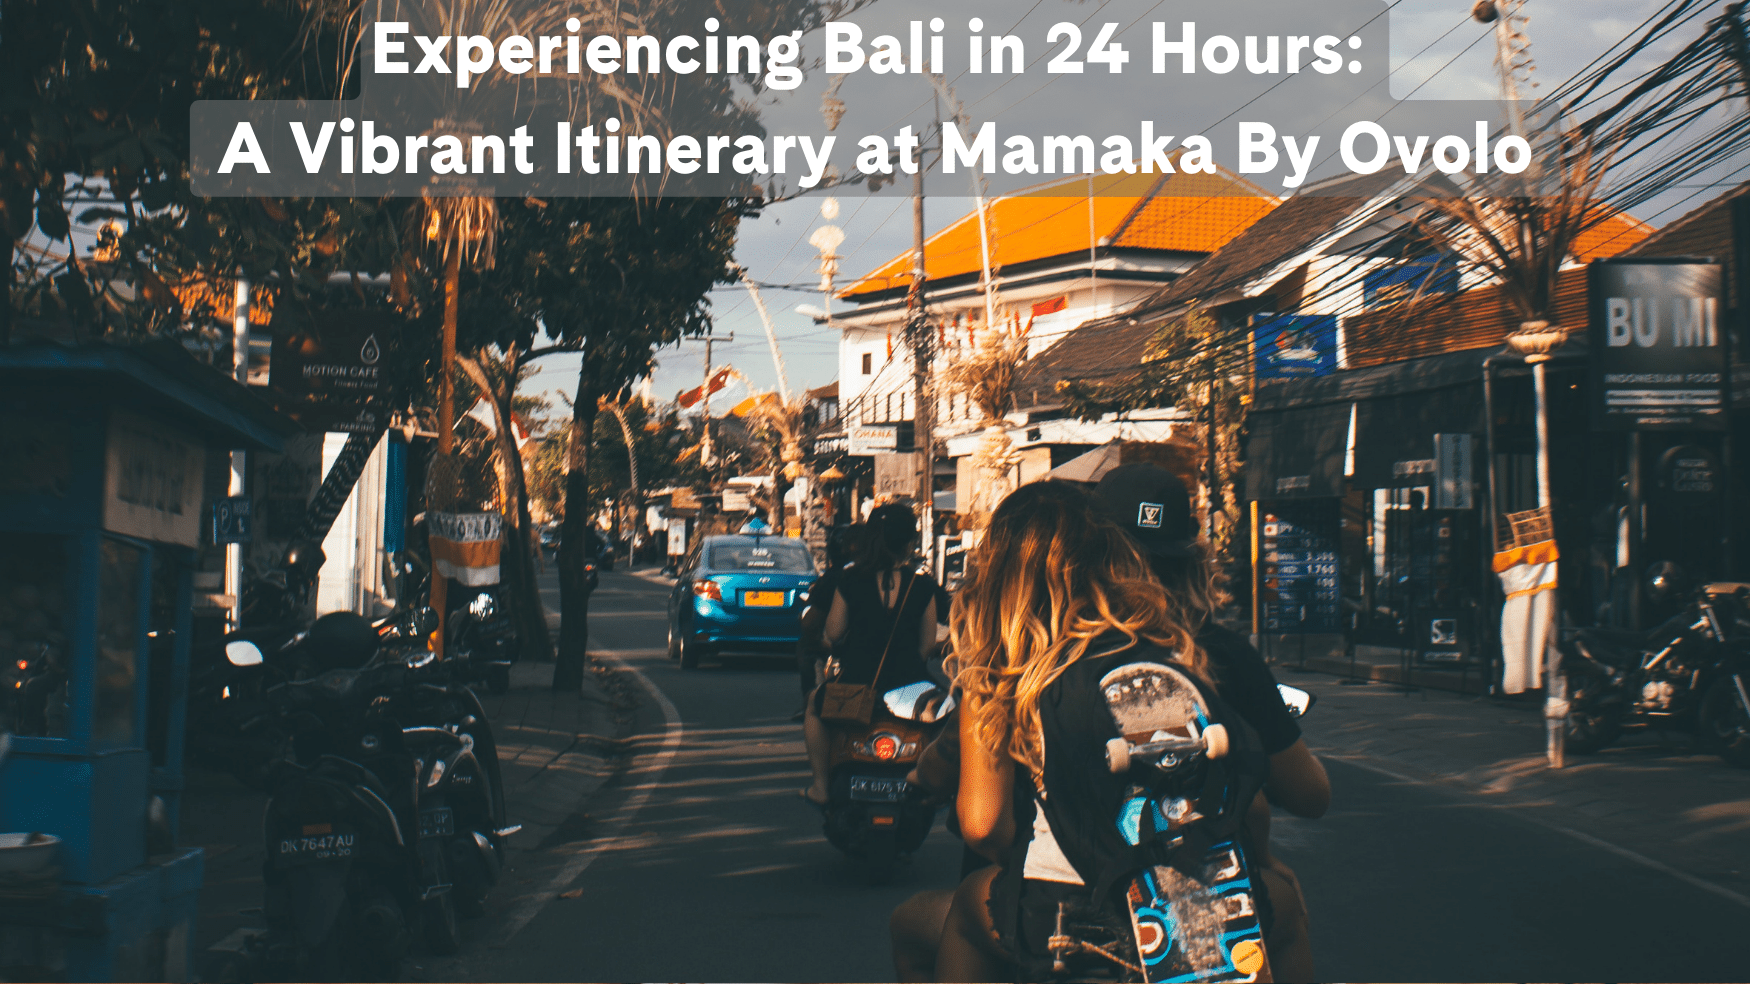 Experiencing Bali in 24 Hours: A Vibrant Itinerary at Mamaka by Ovolo